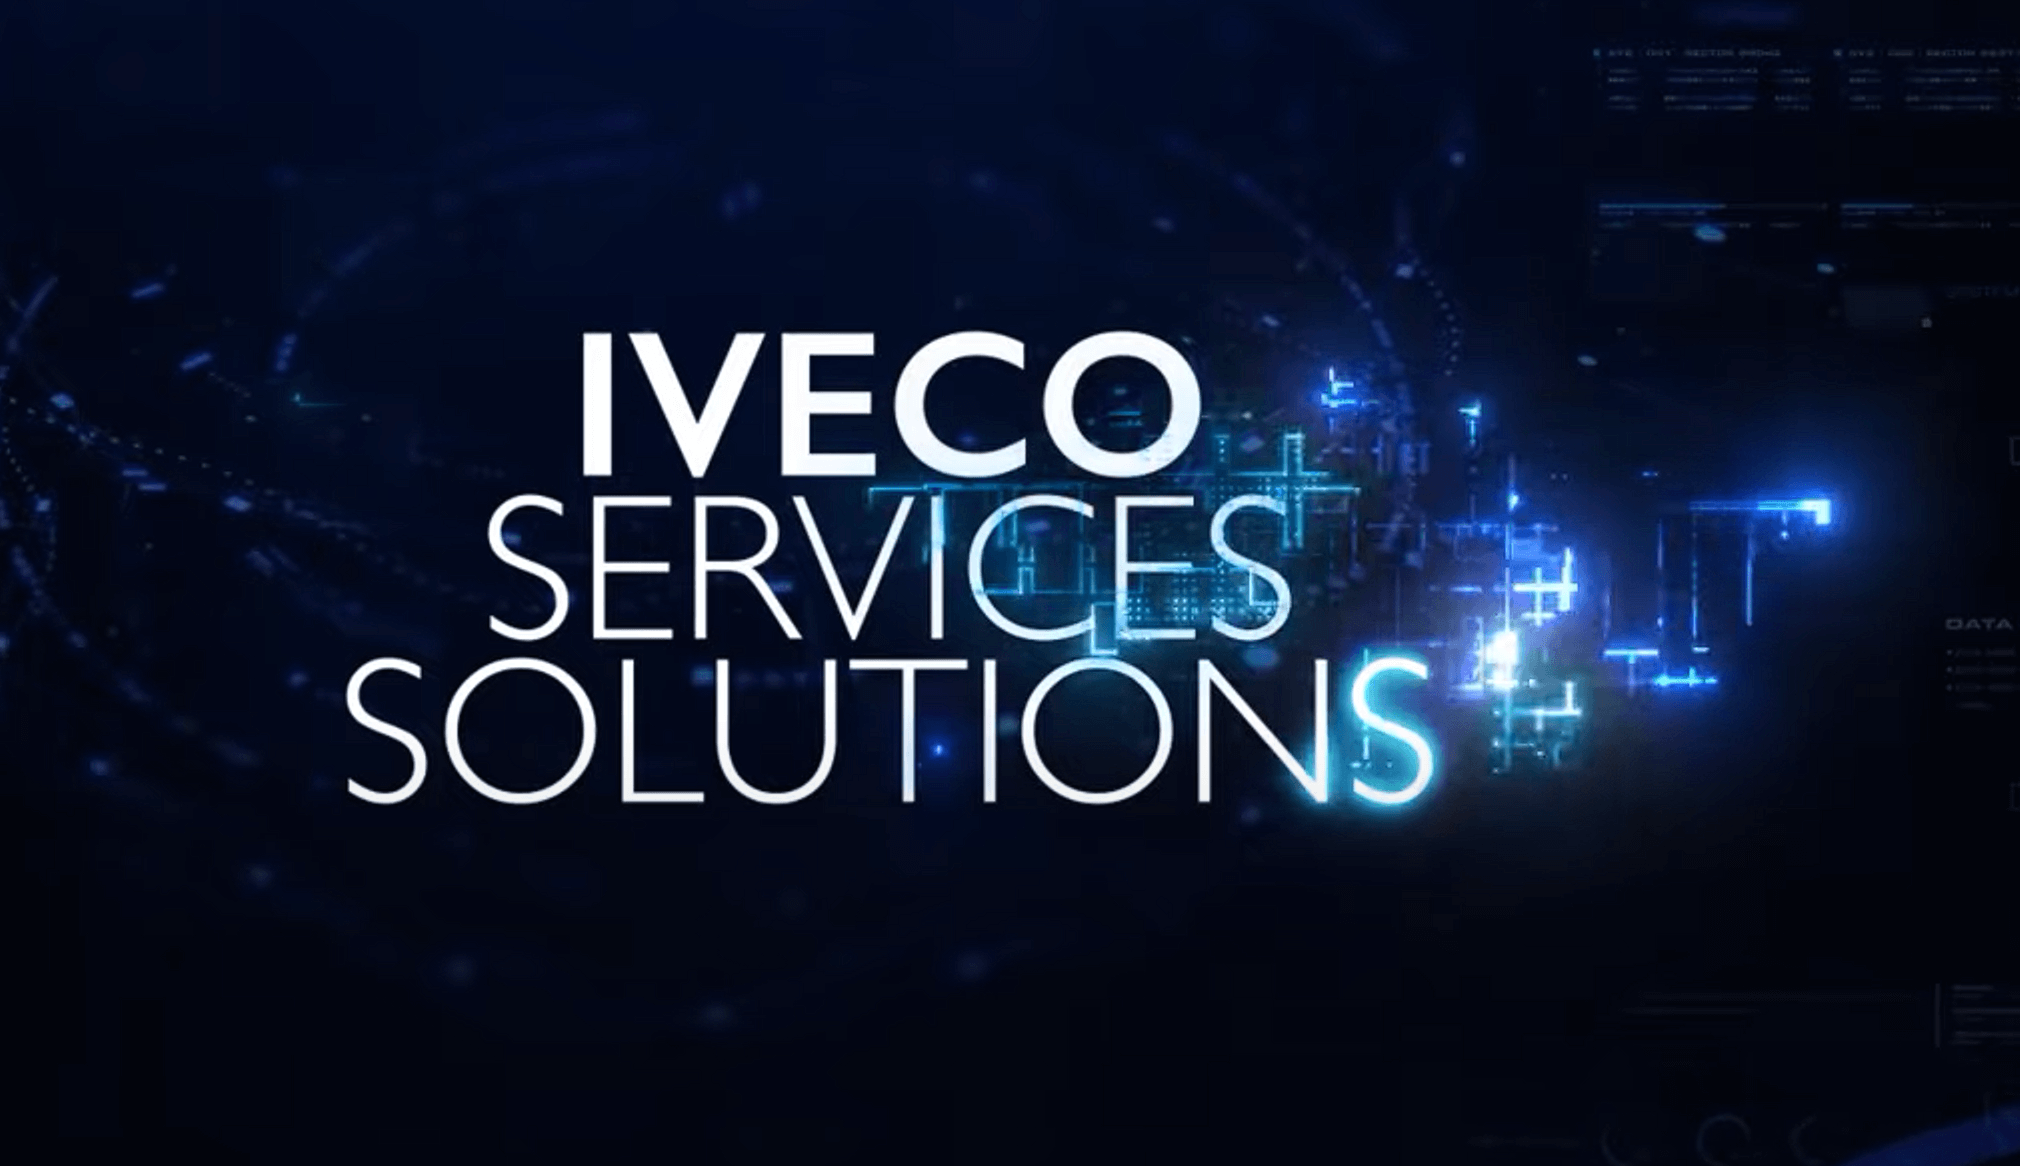 iveco services solutions